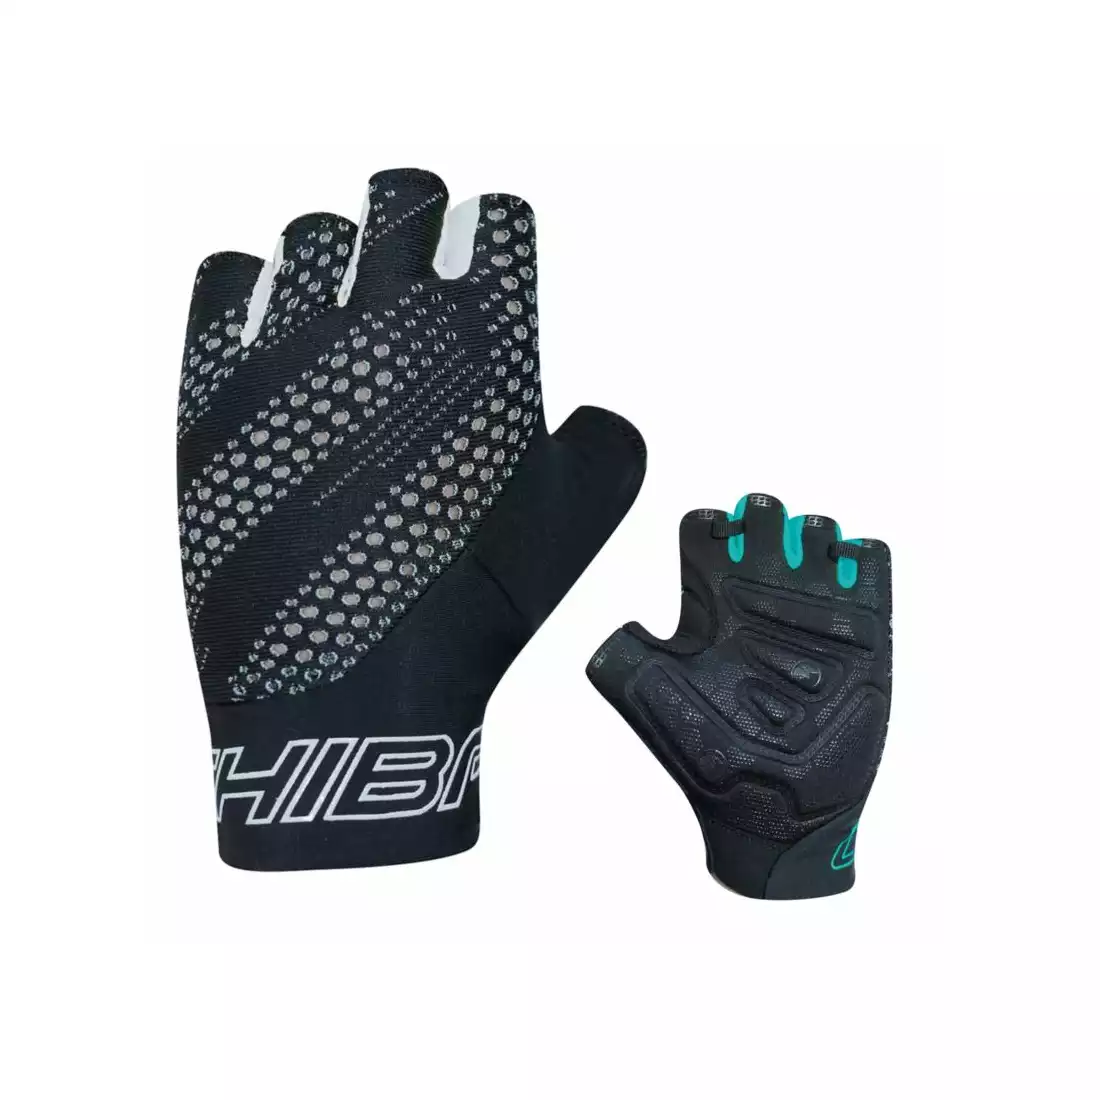 CHIBA ERGO Cycling gloves, black and white